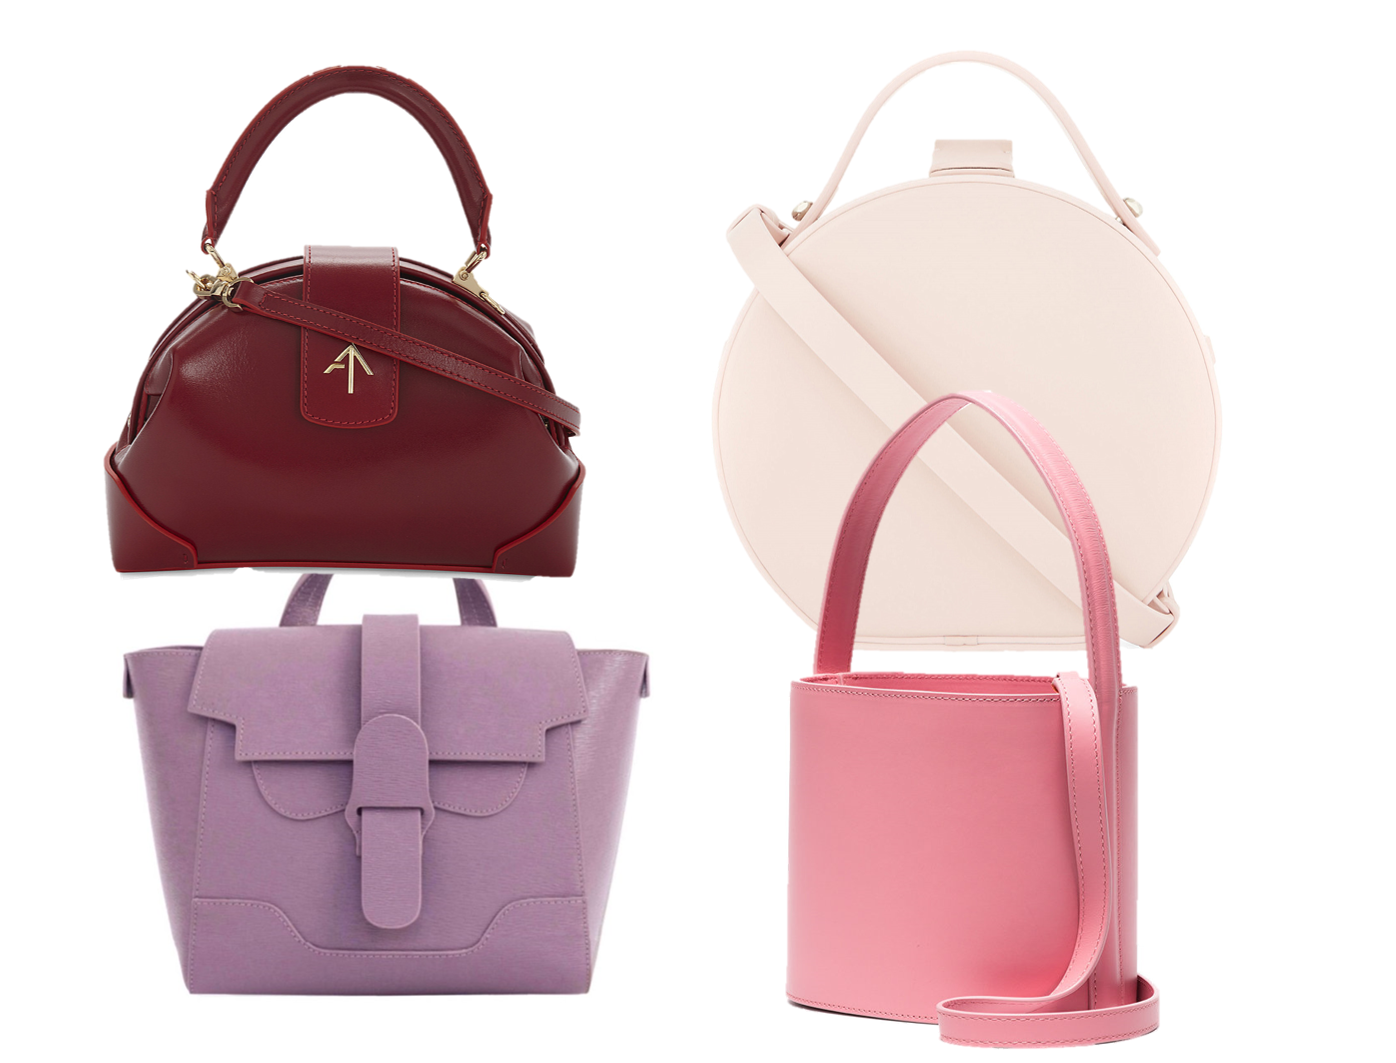 Fashionable handbag brands you should know about | Chic Journal blog